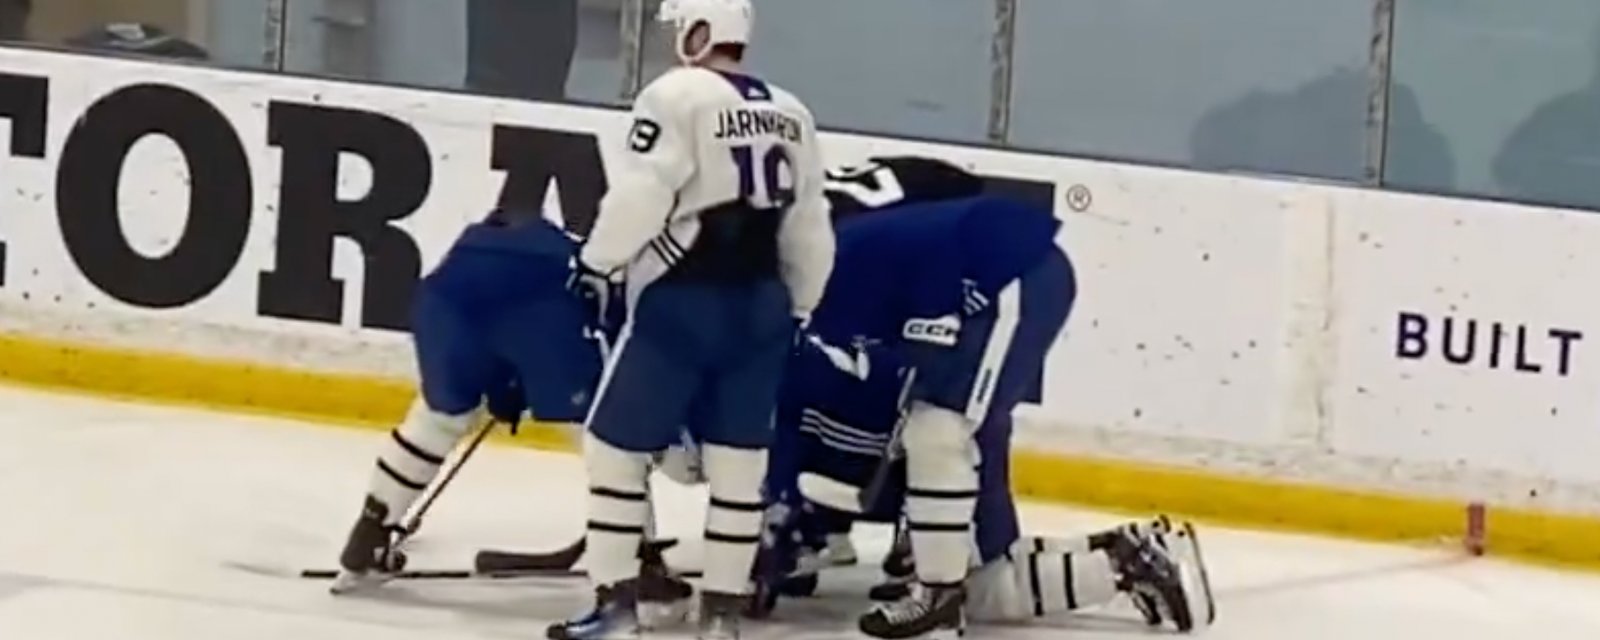 Matthew Knies seriously injured at Leafs’ practice